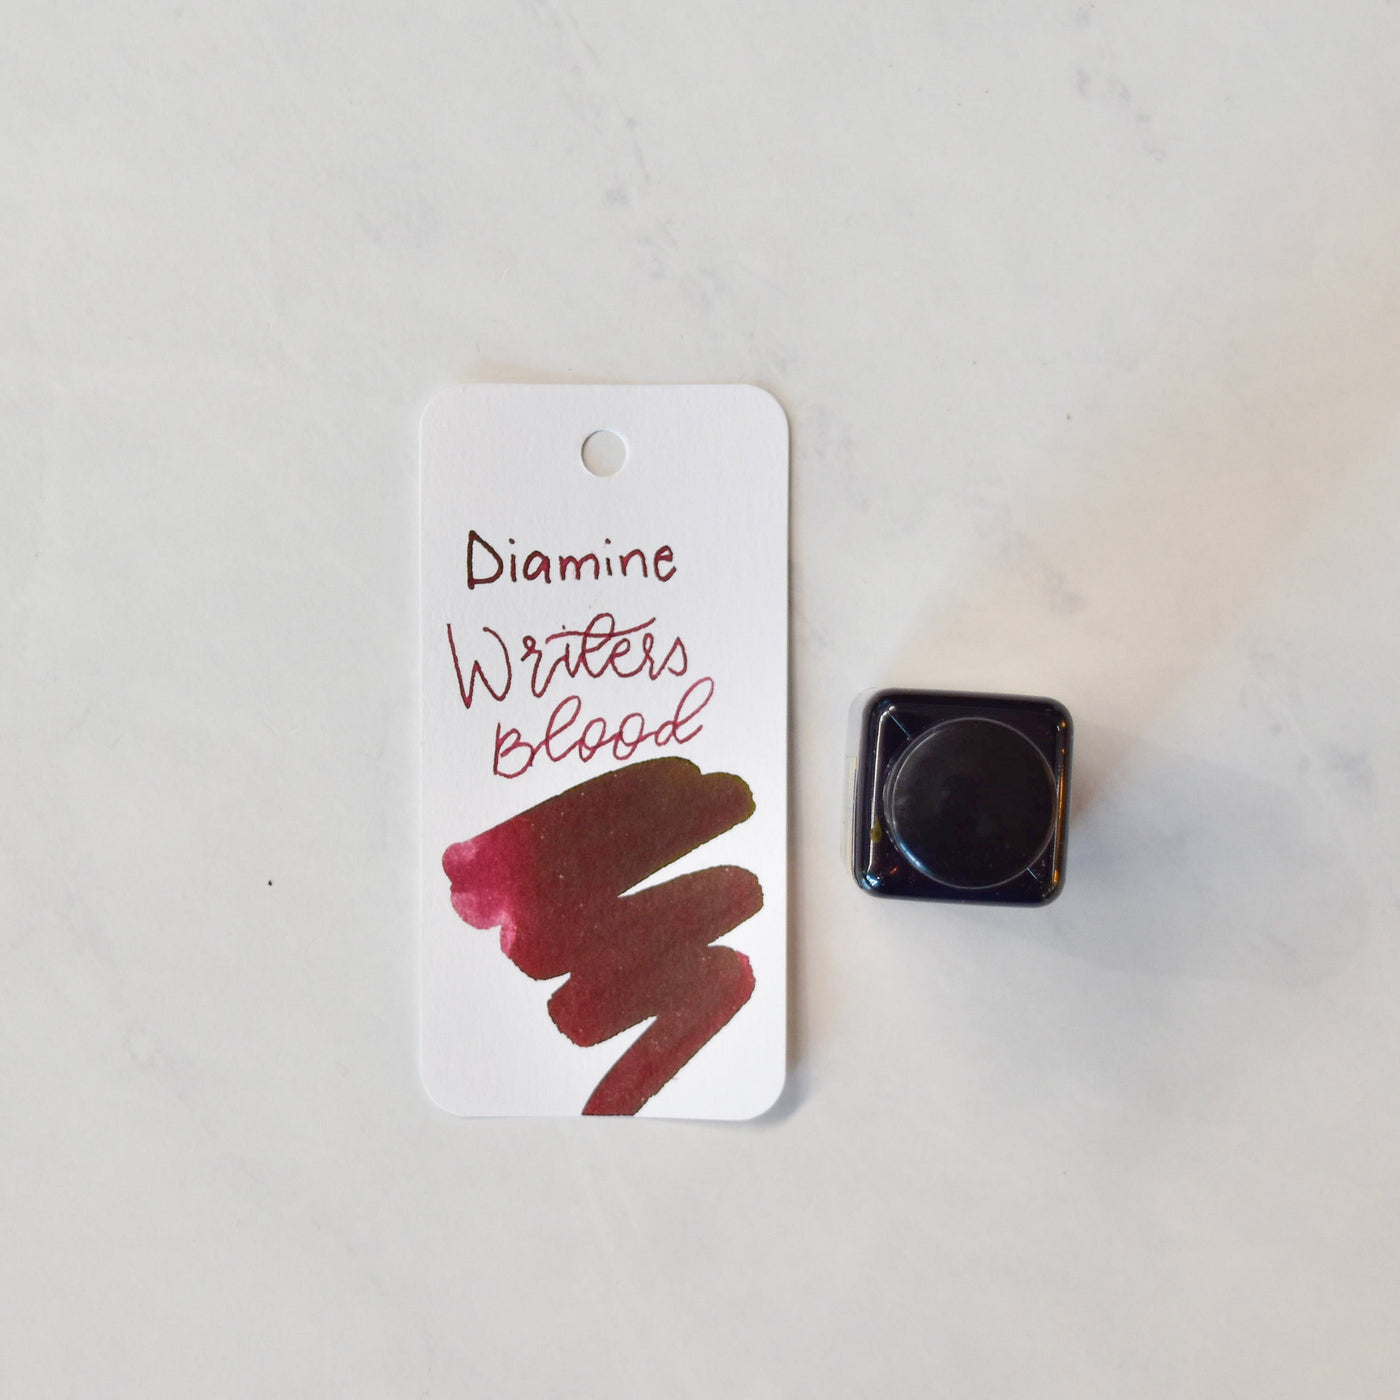 Diamine Writers Blood Ink red glass bottle